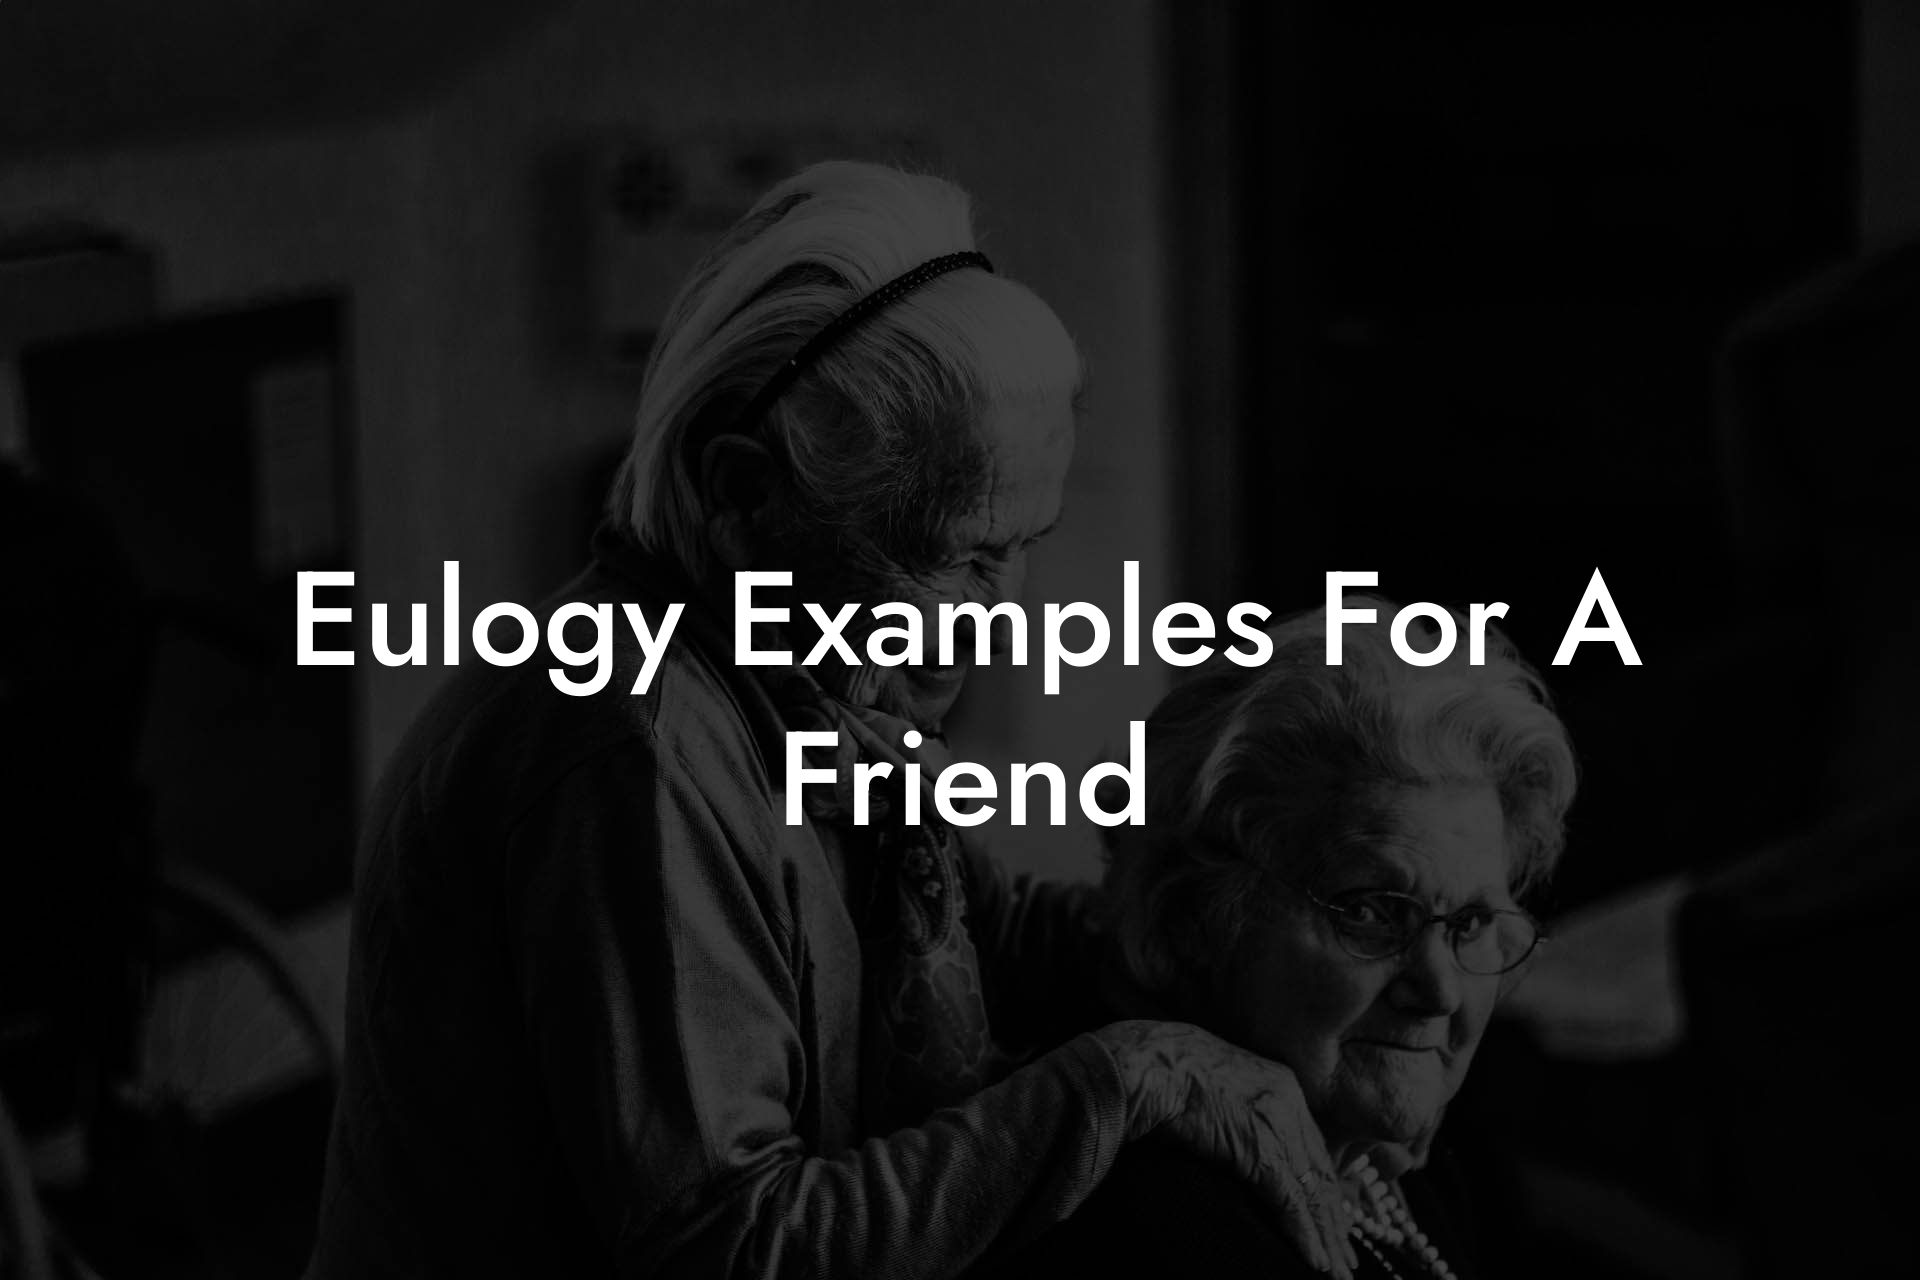 Eulogy Examples For A Friend